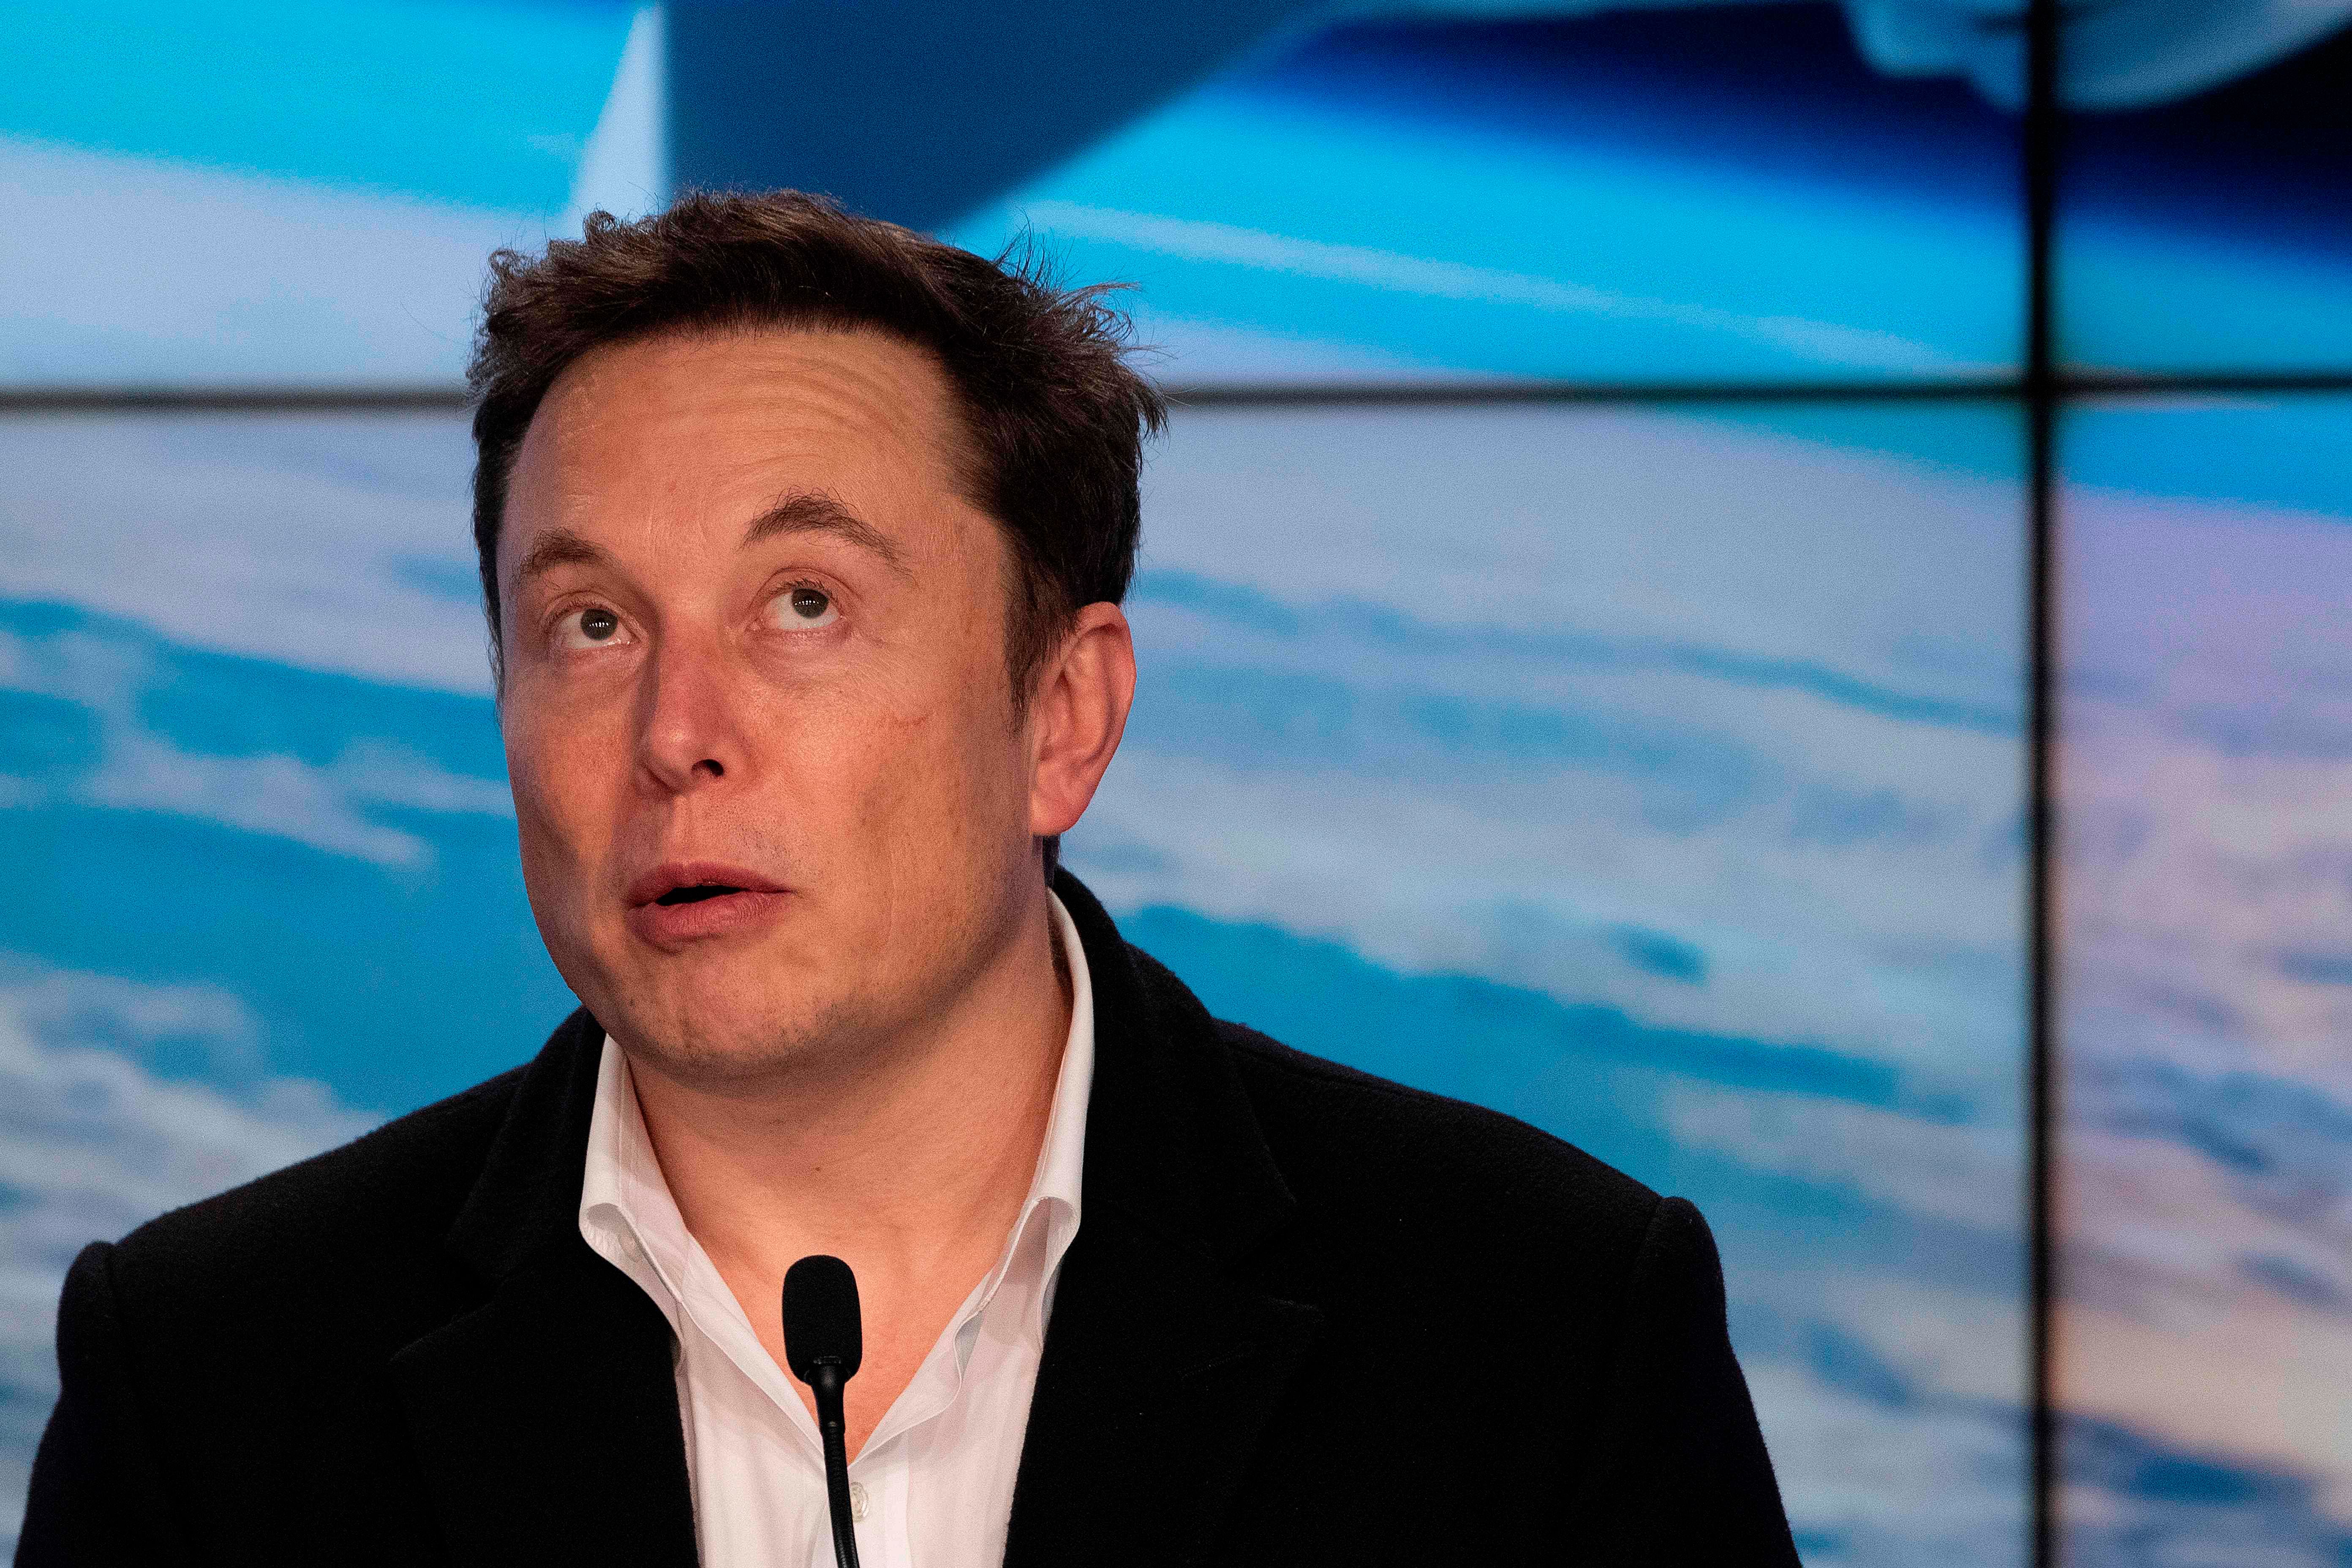 Microsoft Corp is partnering with Elon Musk-led SpaceX and others as it targets space customers. Credit: AFP